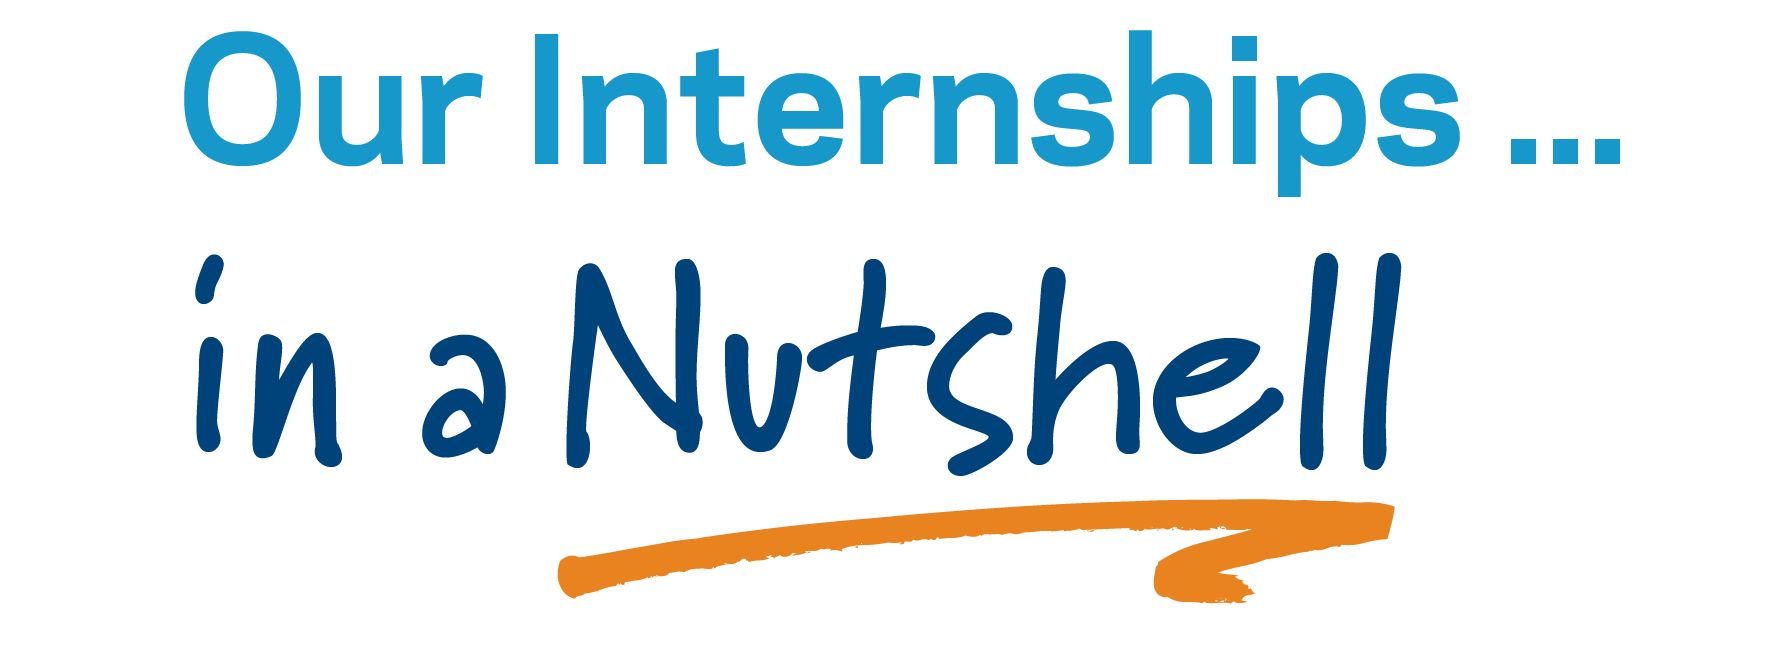 Our Internships in a Nutshell-1